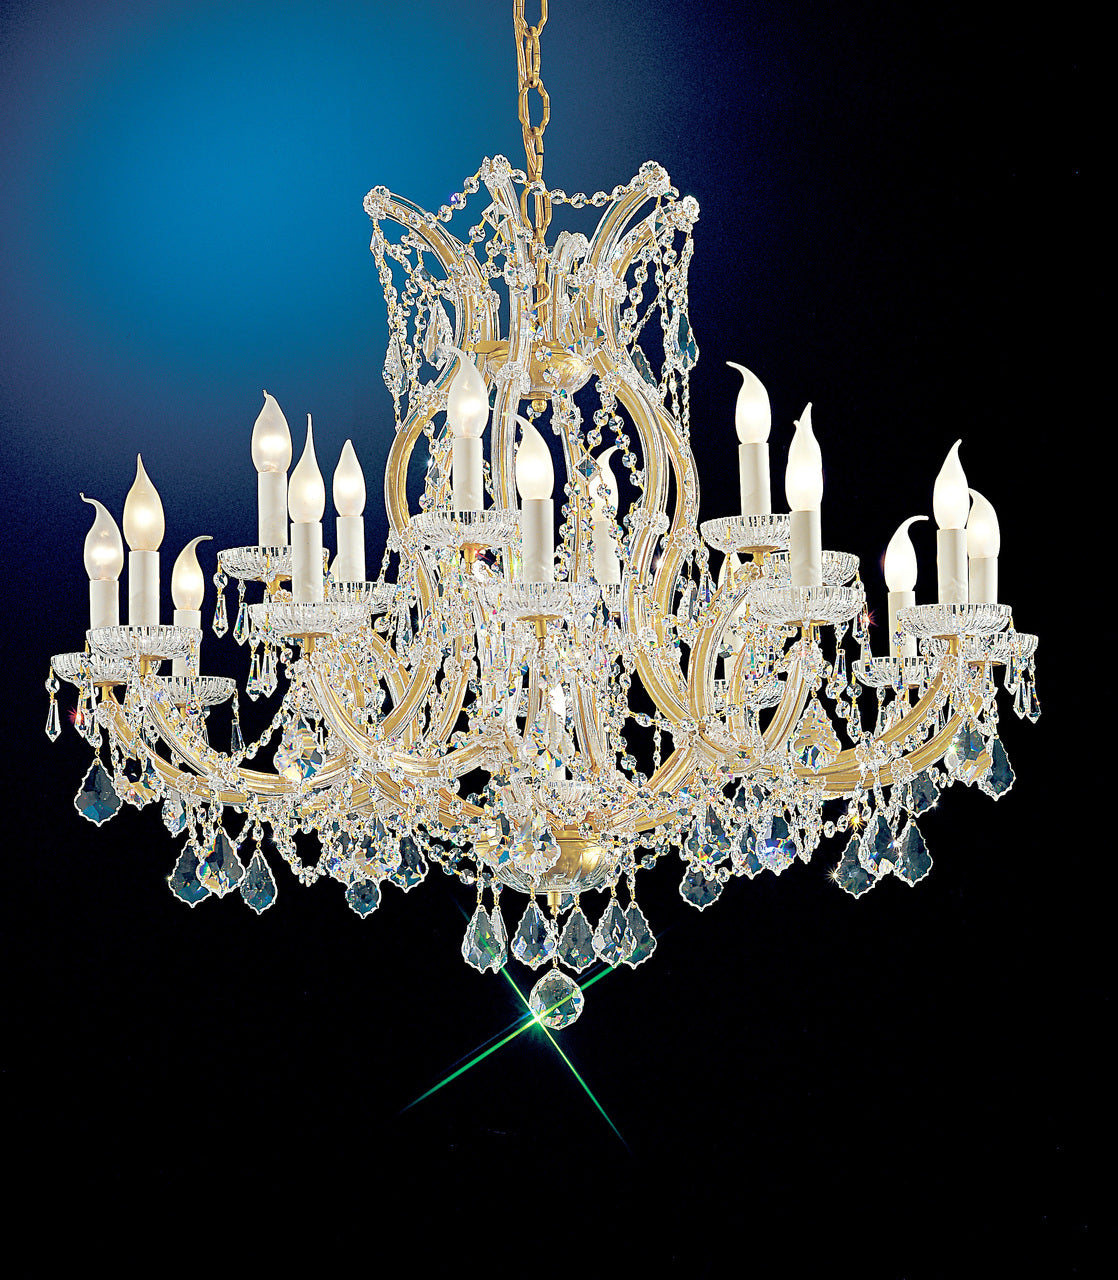 Classic Lighting 8118 OWG C Maria Theresa Traditional Crystal Chandelier in Olde World Gold (Imported from Italy)